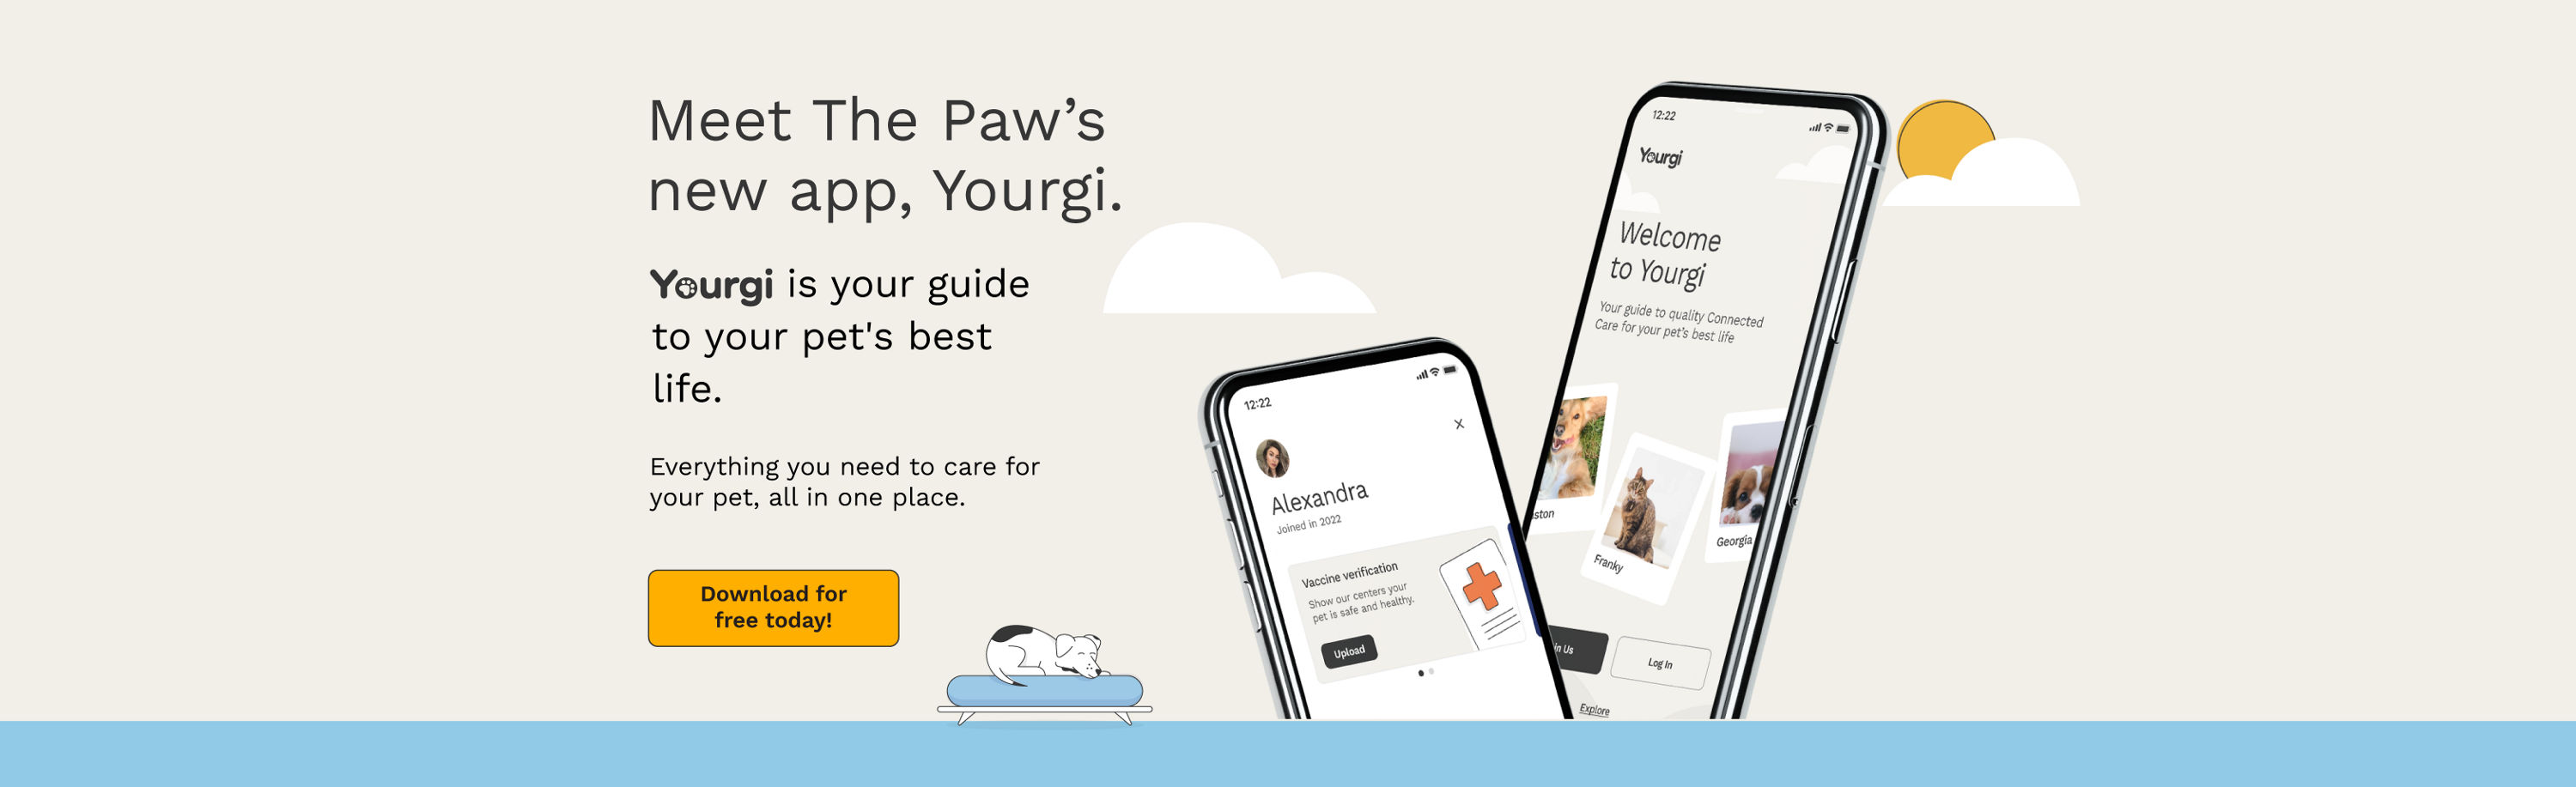 Meet The Paw's new app, Yourgi.